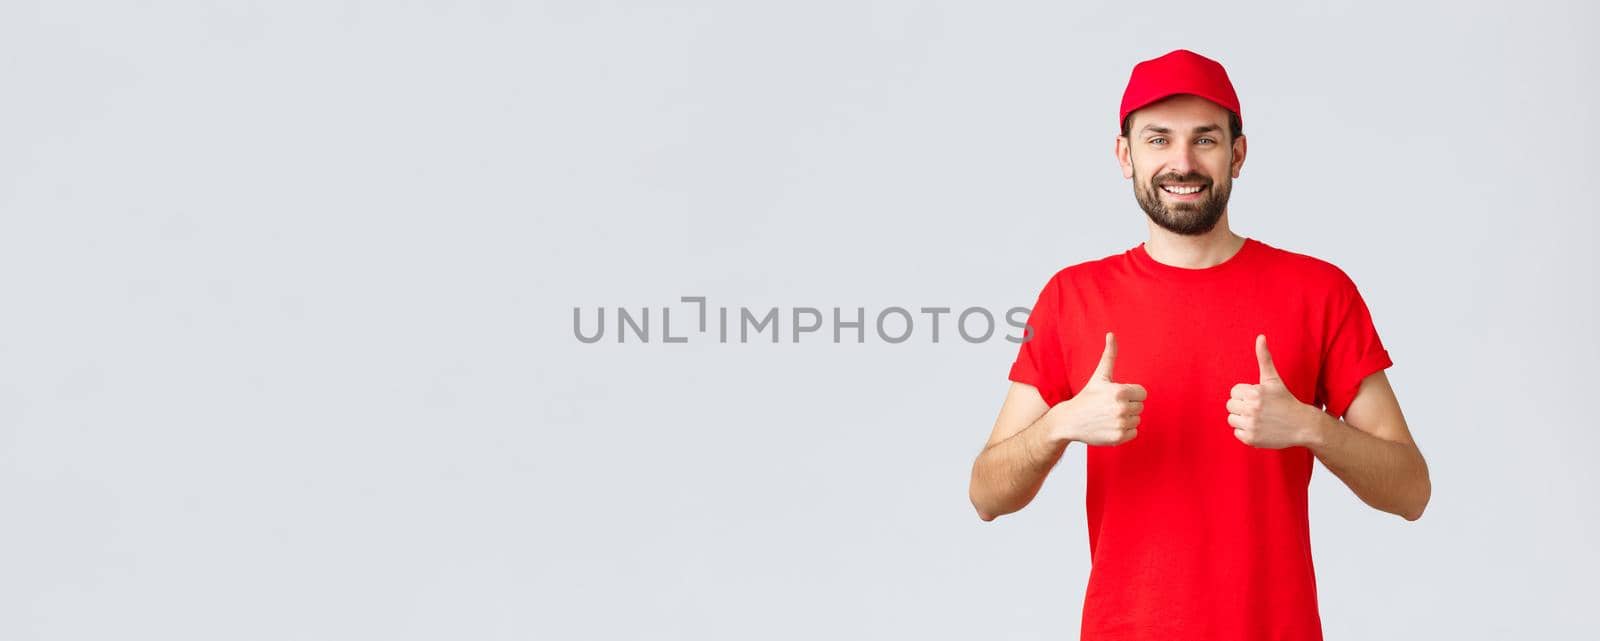 Online shopping, delivery during quarantine and takeaway concept. Cheerful courier in red uniform cap and t-shirt, recommends make orders, thumbs-up in approval, grey background.